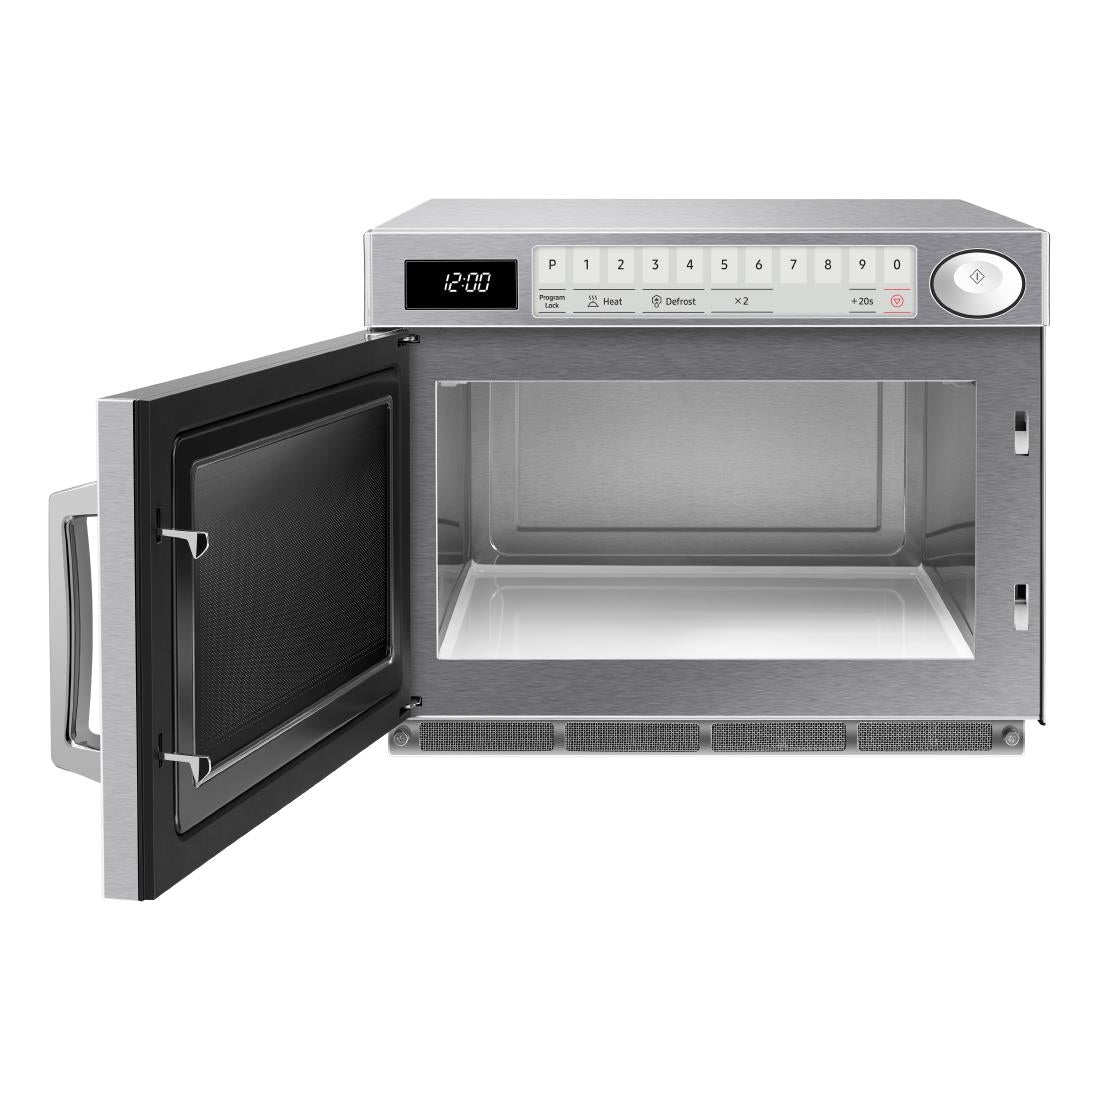 FS319 Samsung Commercial Microwave Digital 26Ltr 1000W JD Catering Equipment Solutions Ltd